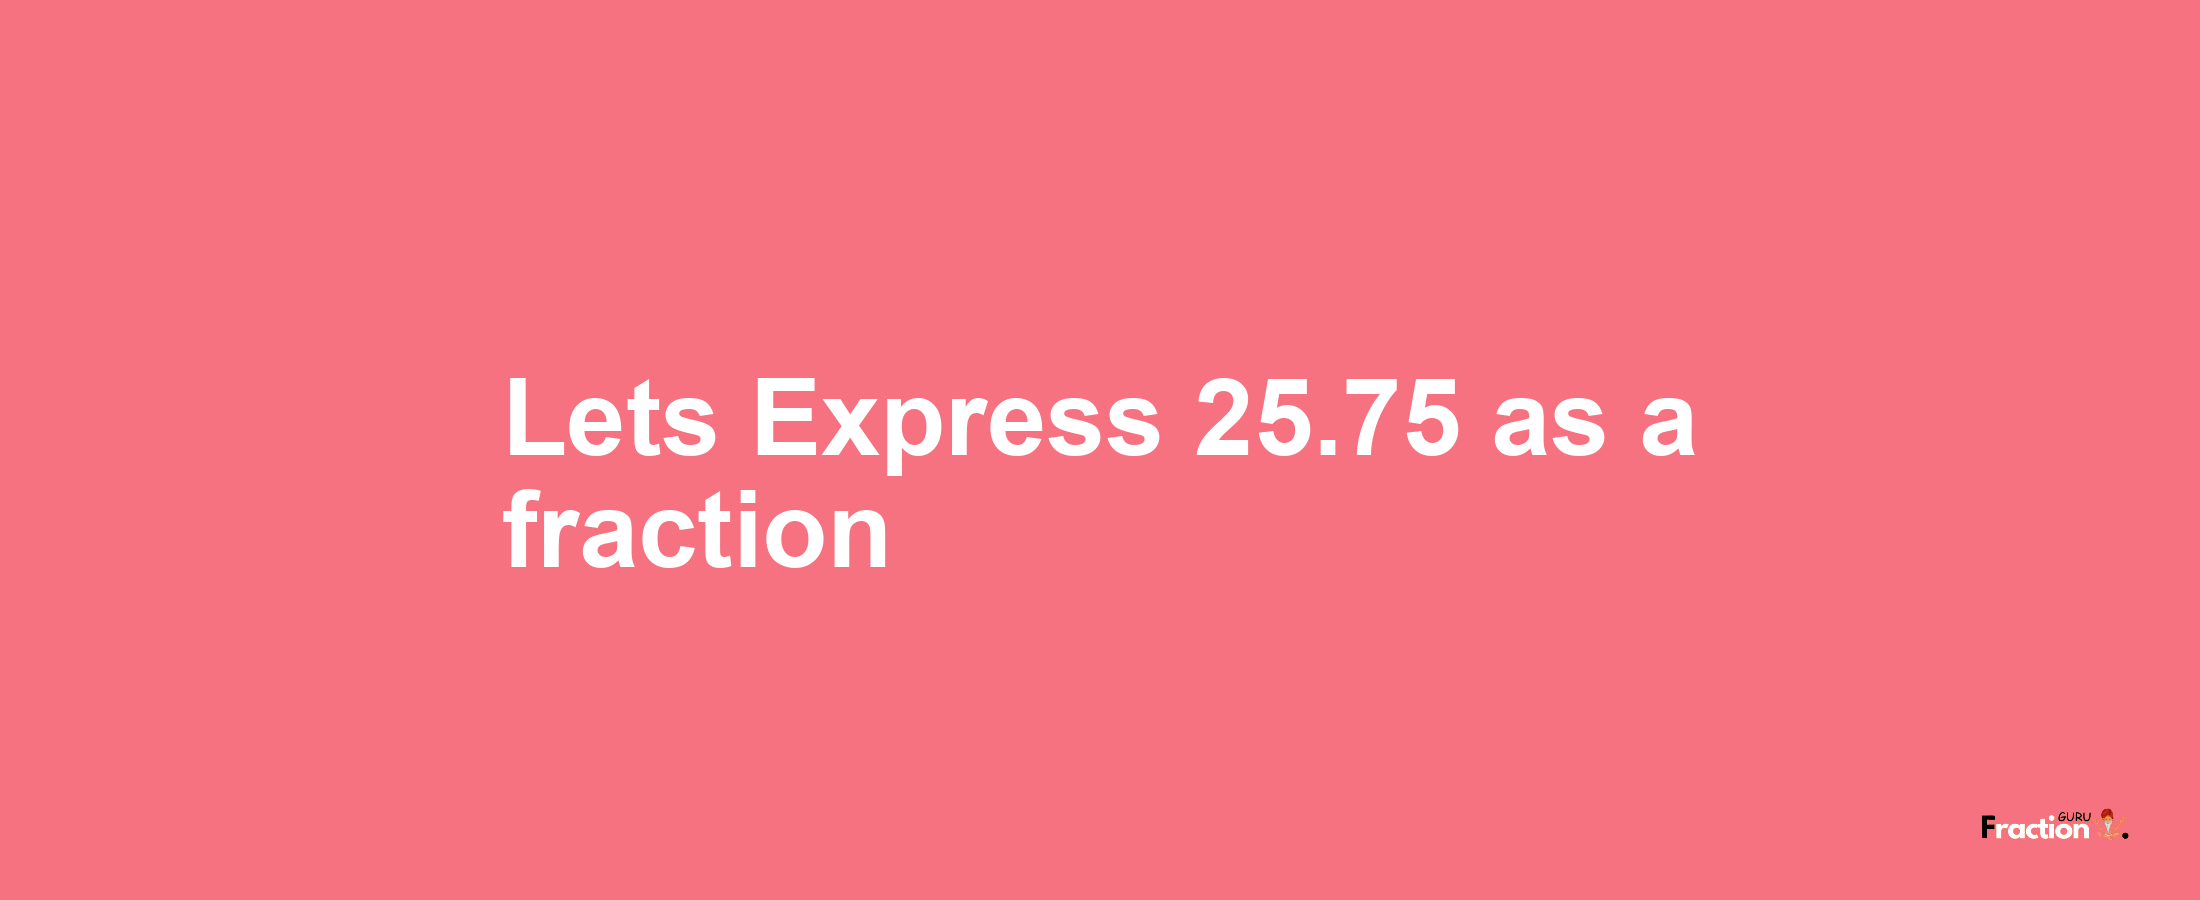 Lets Express 25.75 as afraction